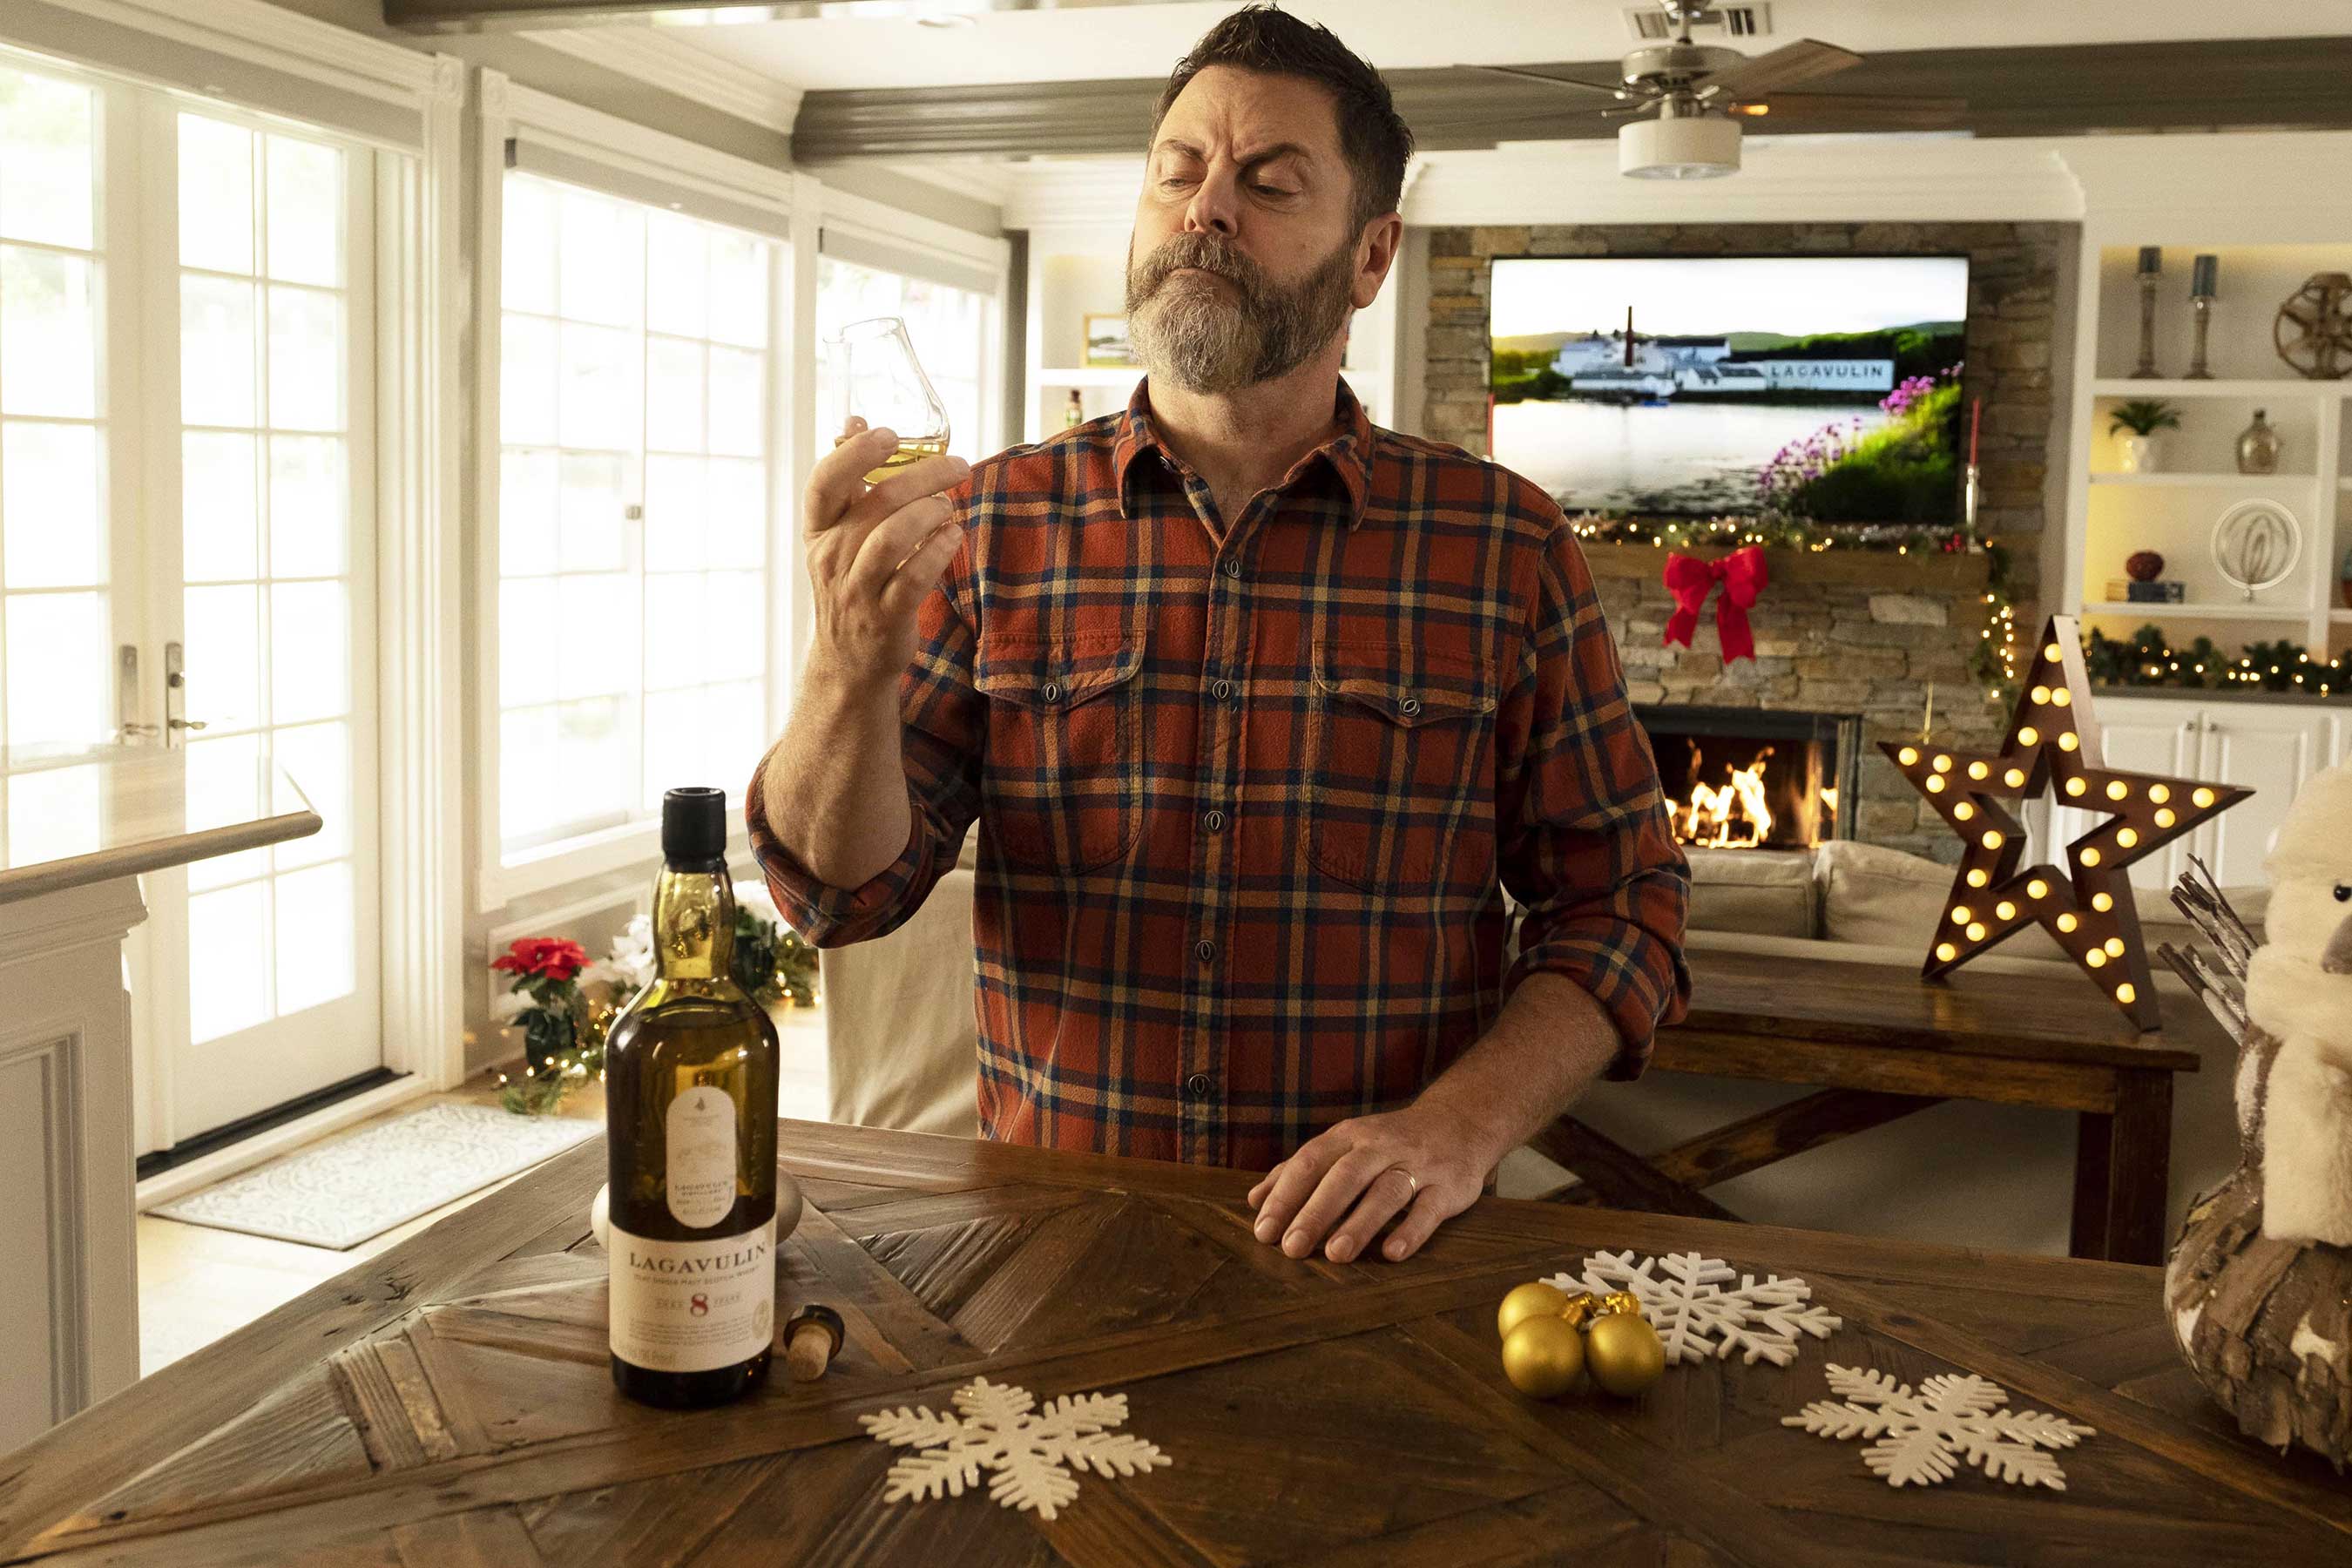 In the newest holiday spot in the ‘Lagavulin: My Tales of Whisky’ series, Nick Offerman shares how you can have a perfectly good holiday at home, free from endless screen time and new-fangled internet media, despite these unprecedented times.